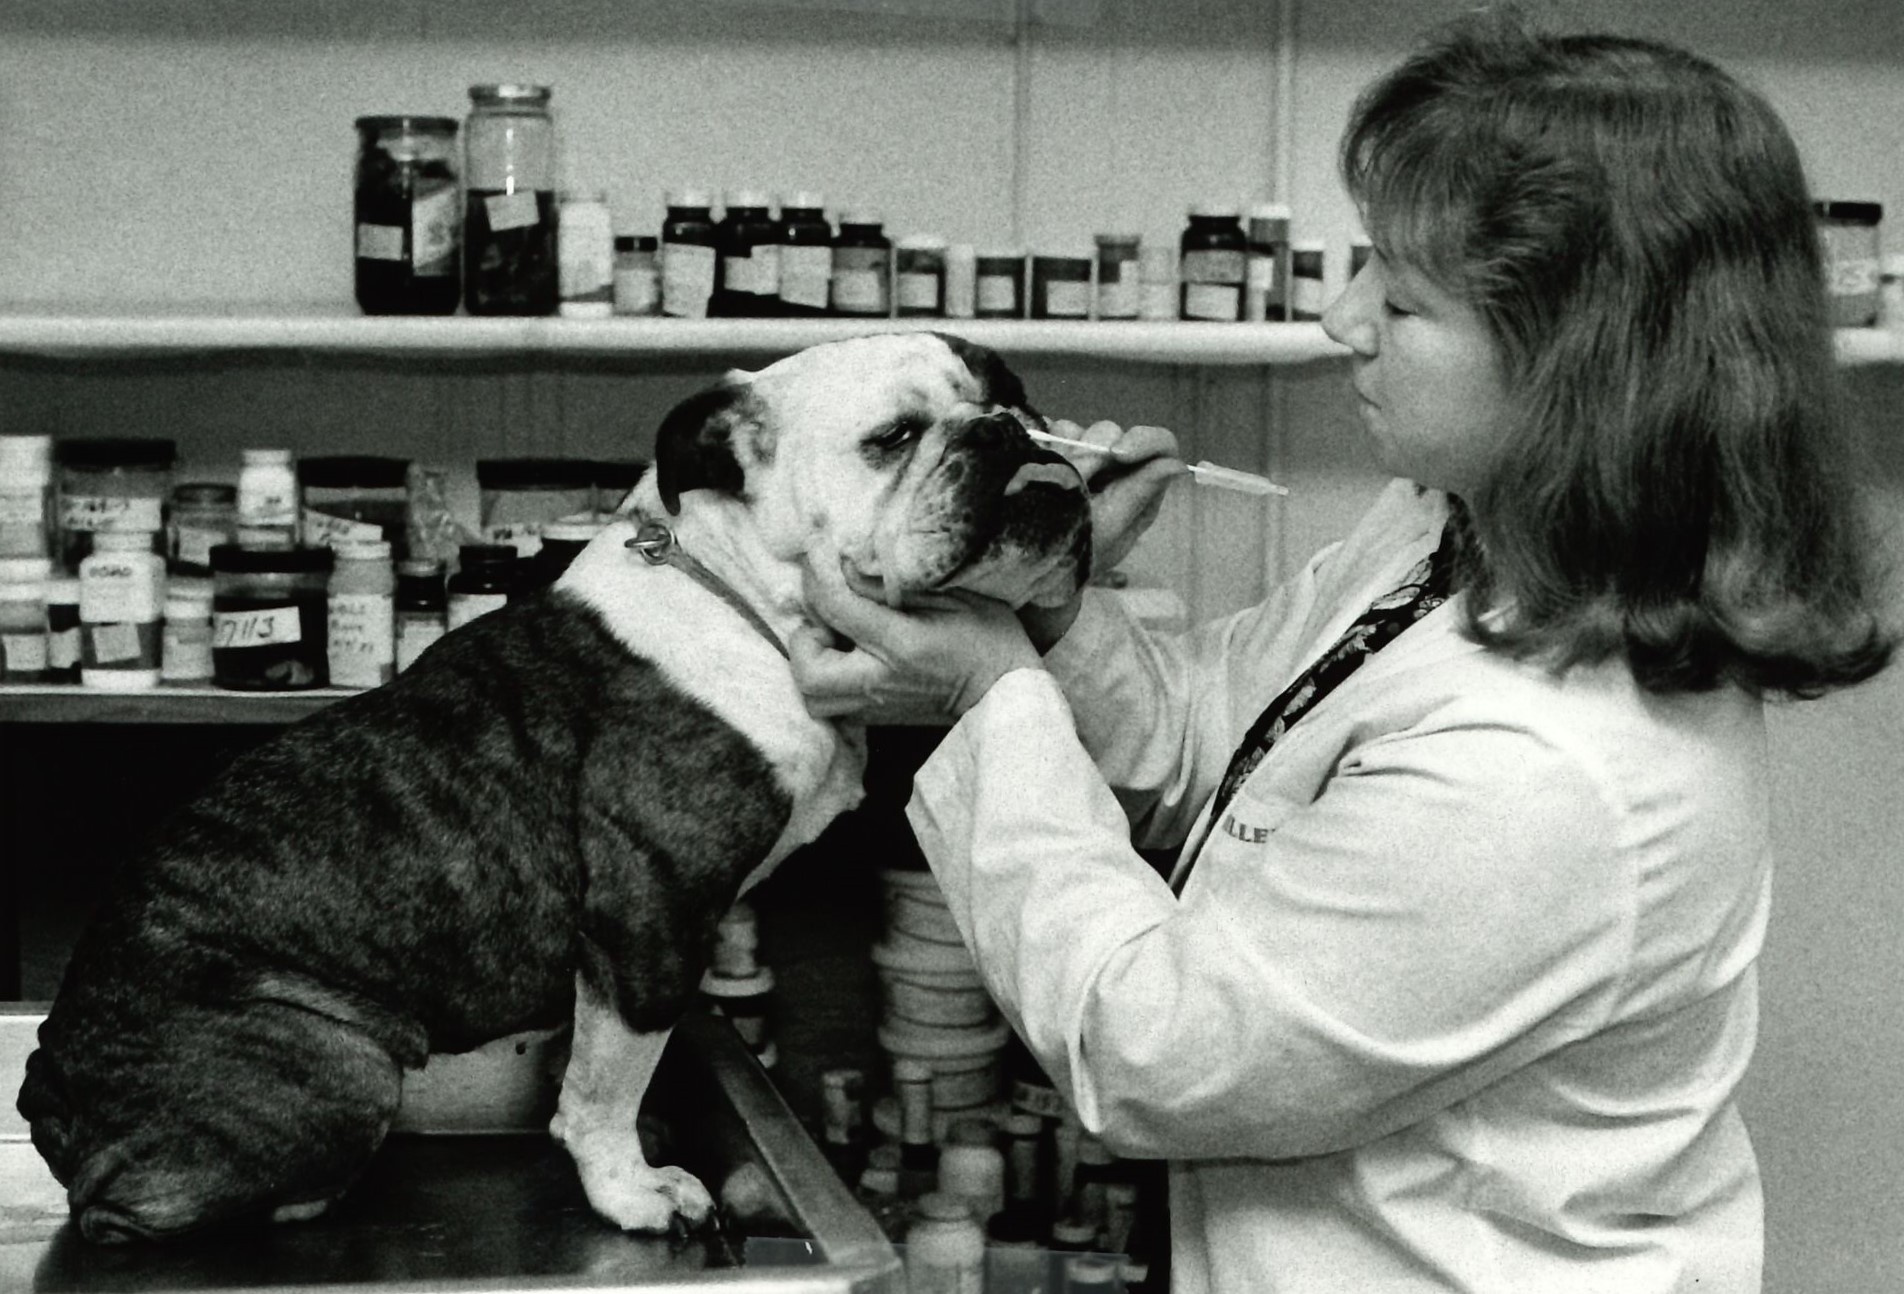 (Date Unknown) Dr. Doris Miller, a veterinary pathologist at Athens Veterinary Diagnostic Laboratory, uses a nose swab on a bulldog to test for bacterial or fungal infection.